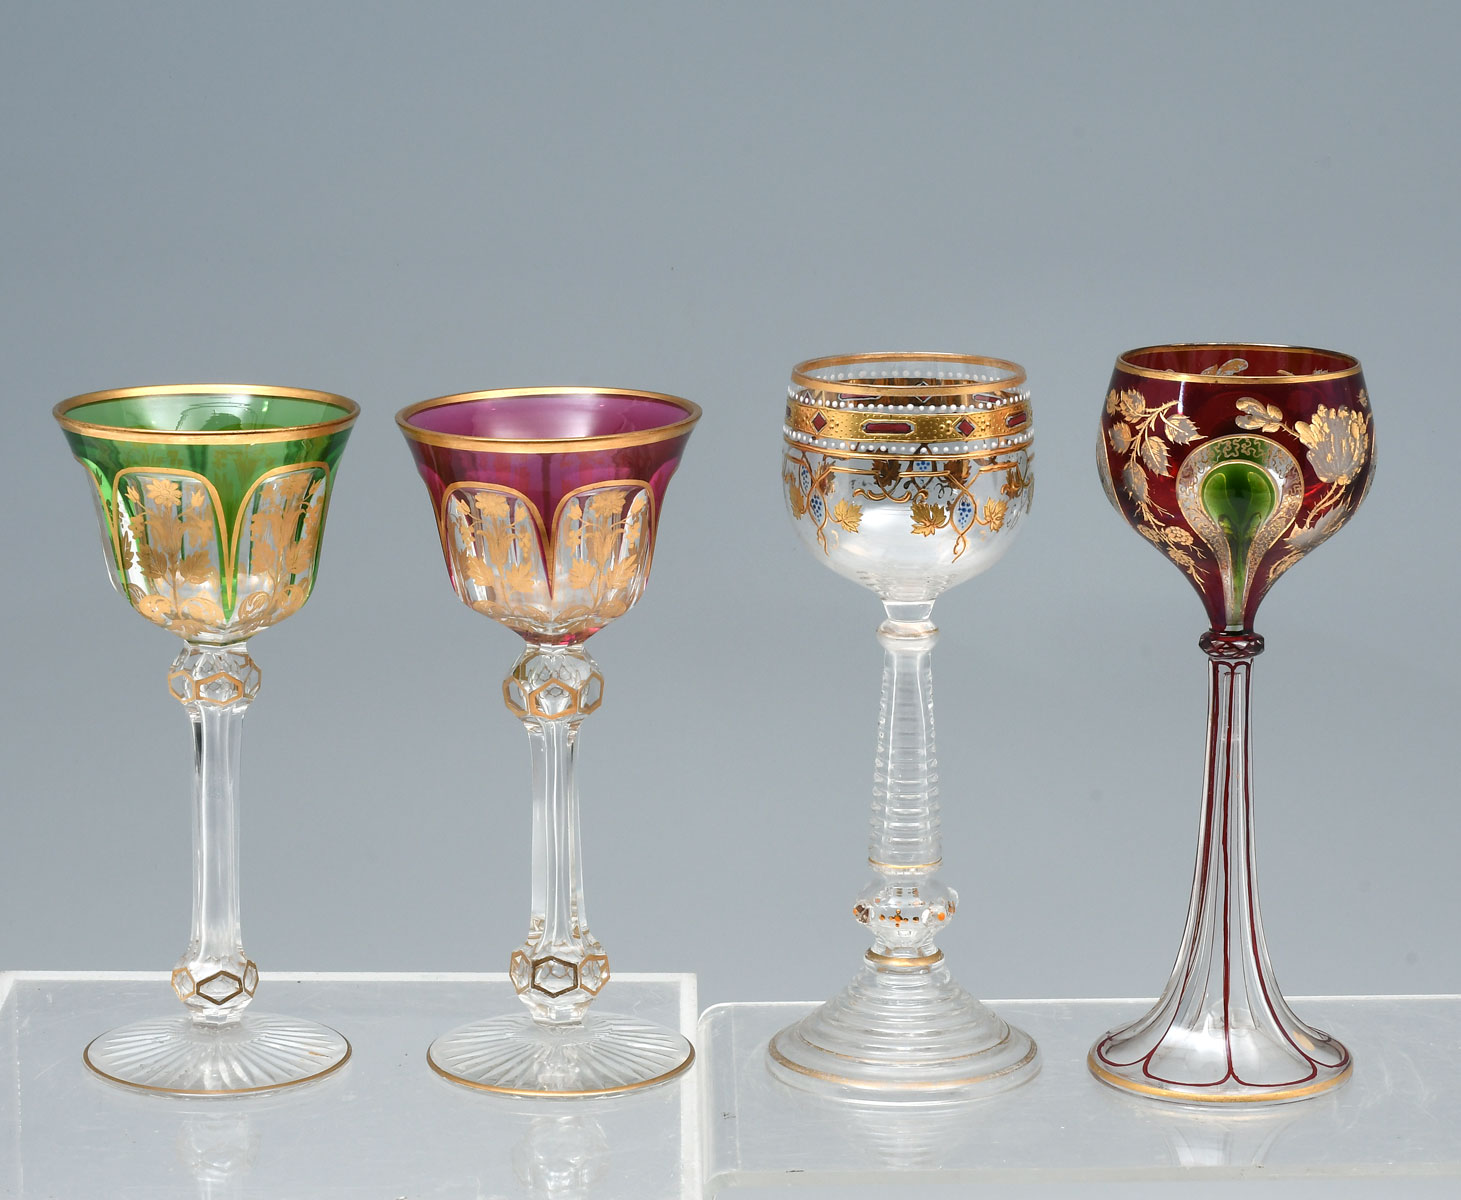 4 PC ENAMELED CHALICES ATTRIBUTED 274ddf